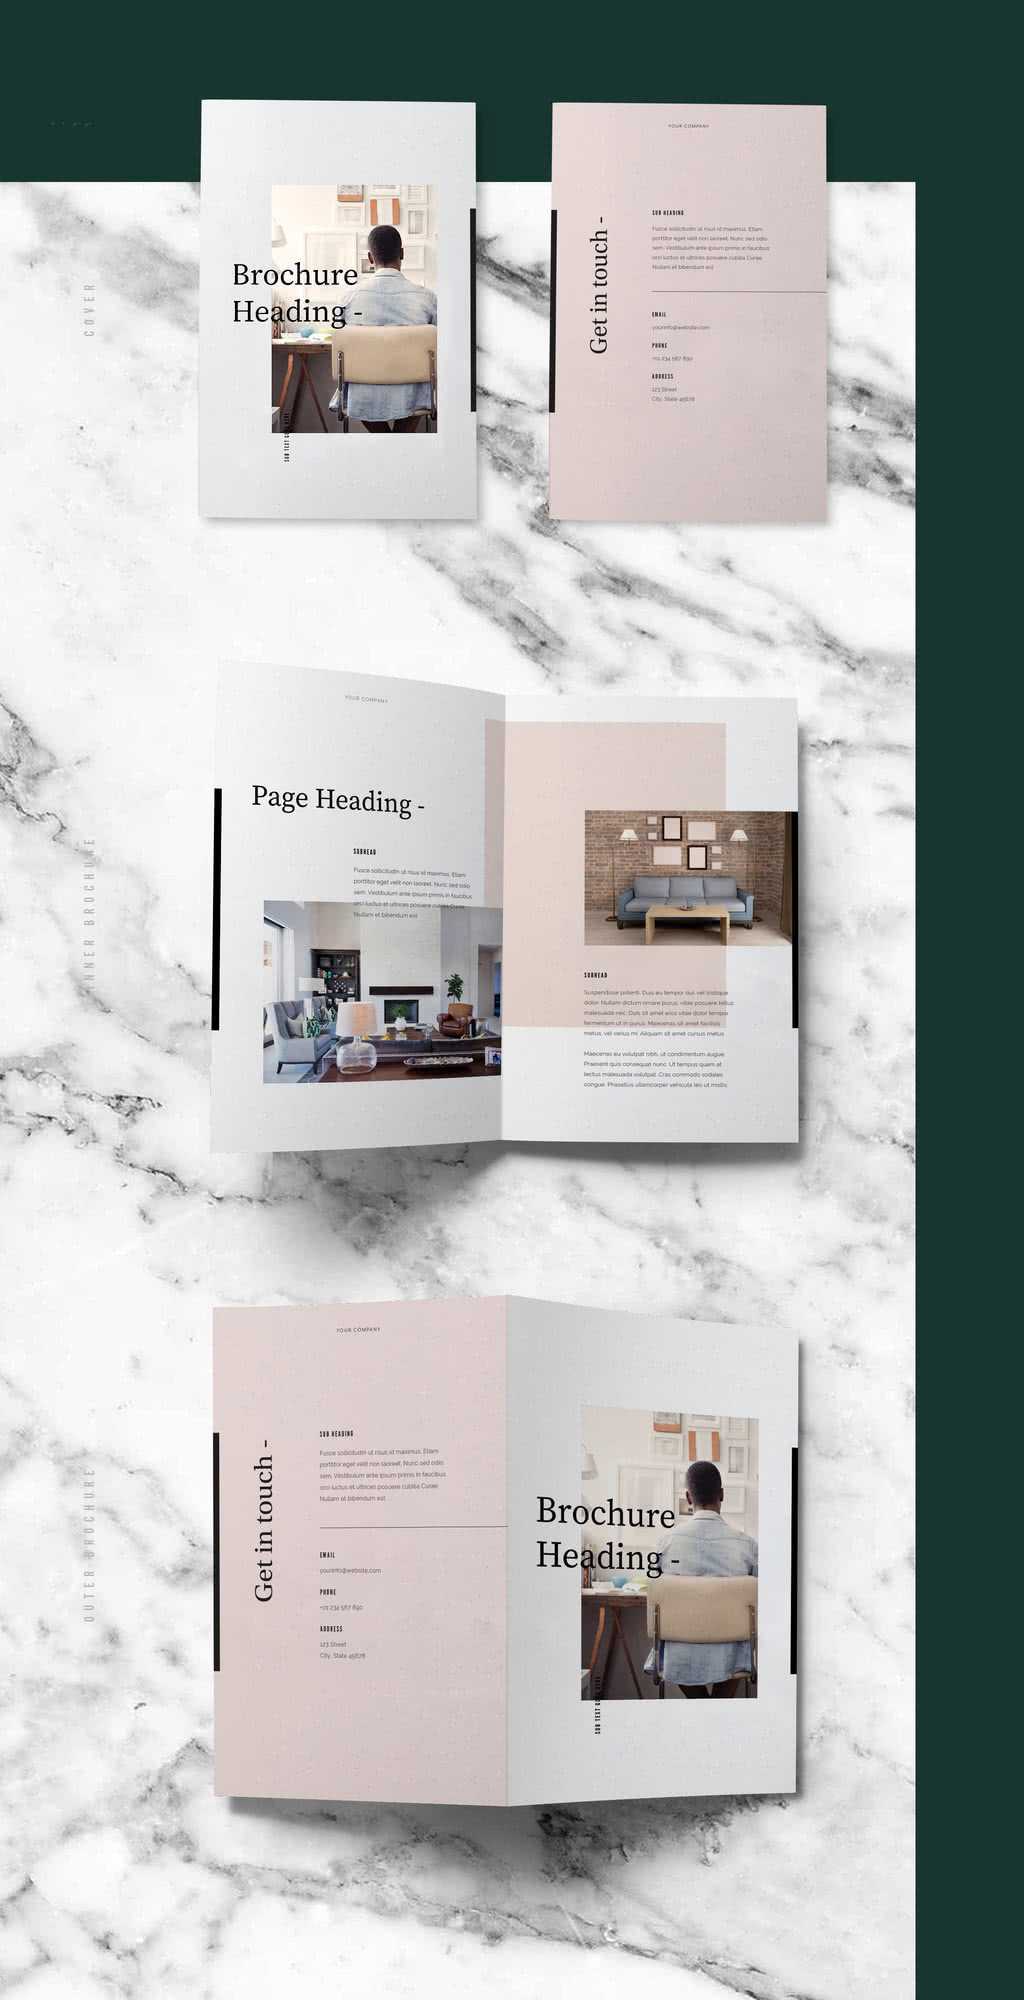 75 Fresh Indesign Templates And Where To Find More With Regard To Indesign Templates Free Download Brochure